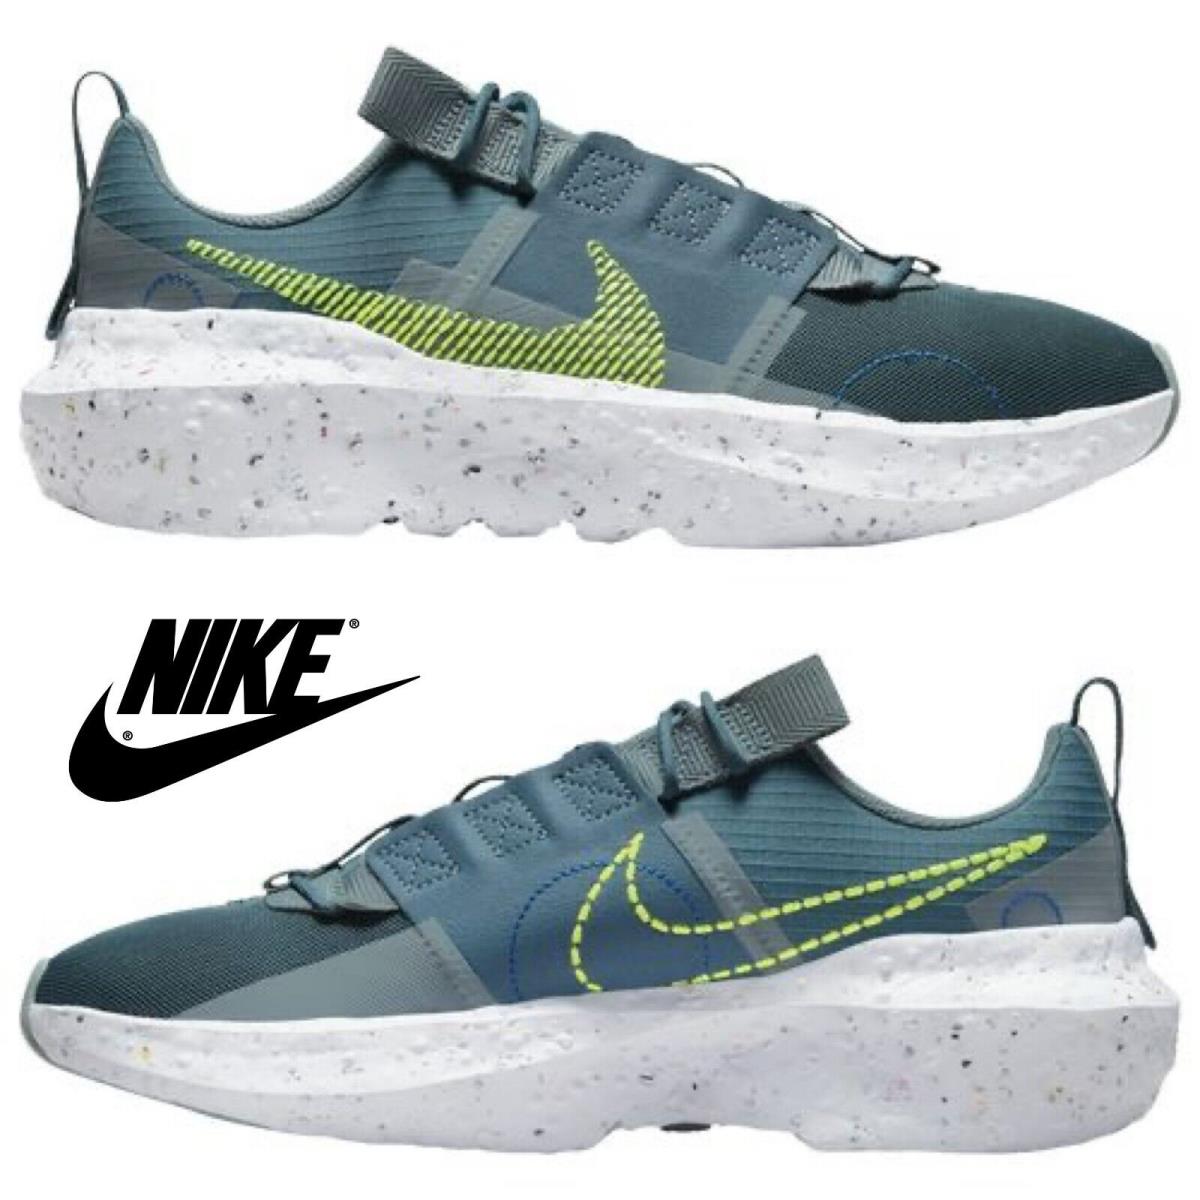 Nike Men`s Crater Impact Sneakers Training Athletic Sport Casual Shoes Geen - Gray, Manufacturer: Green/Volt/Orange